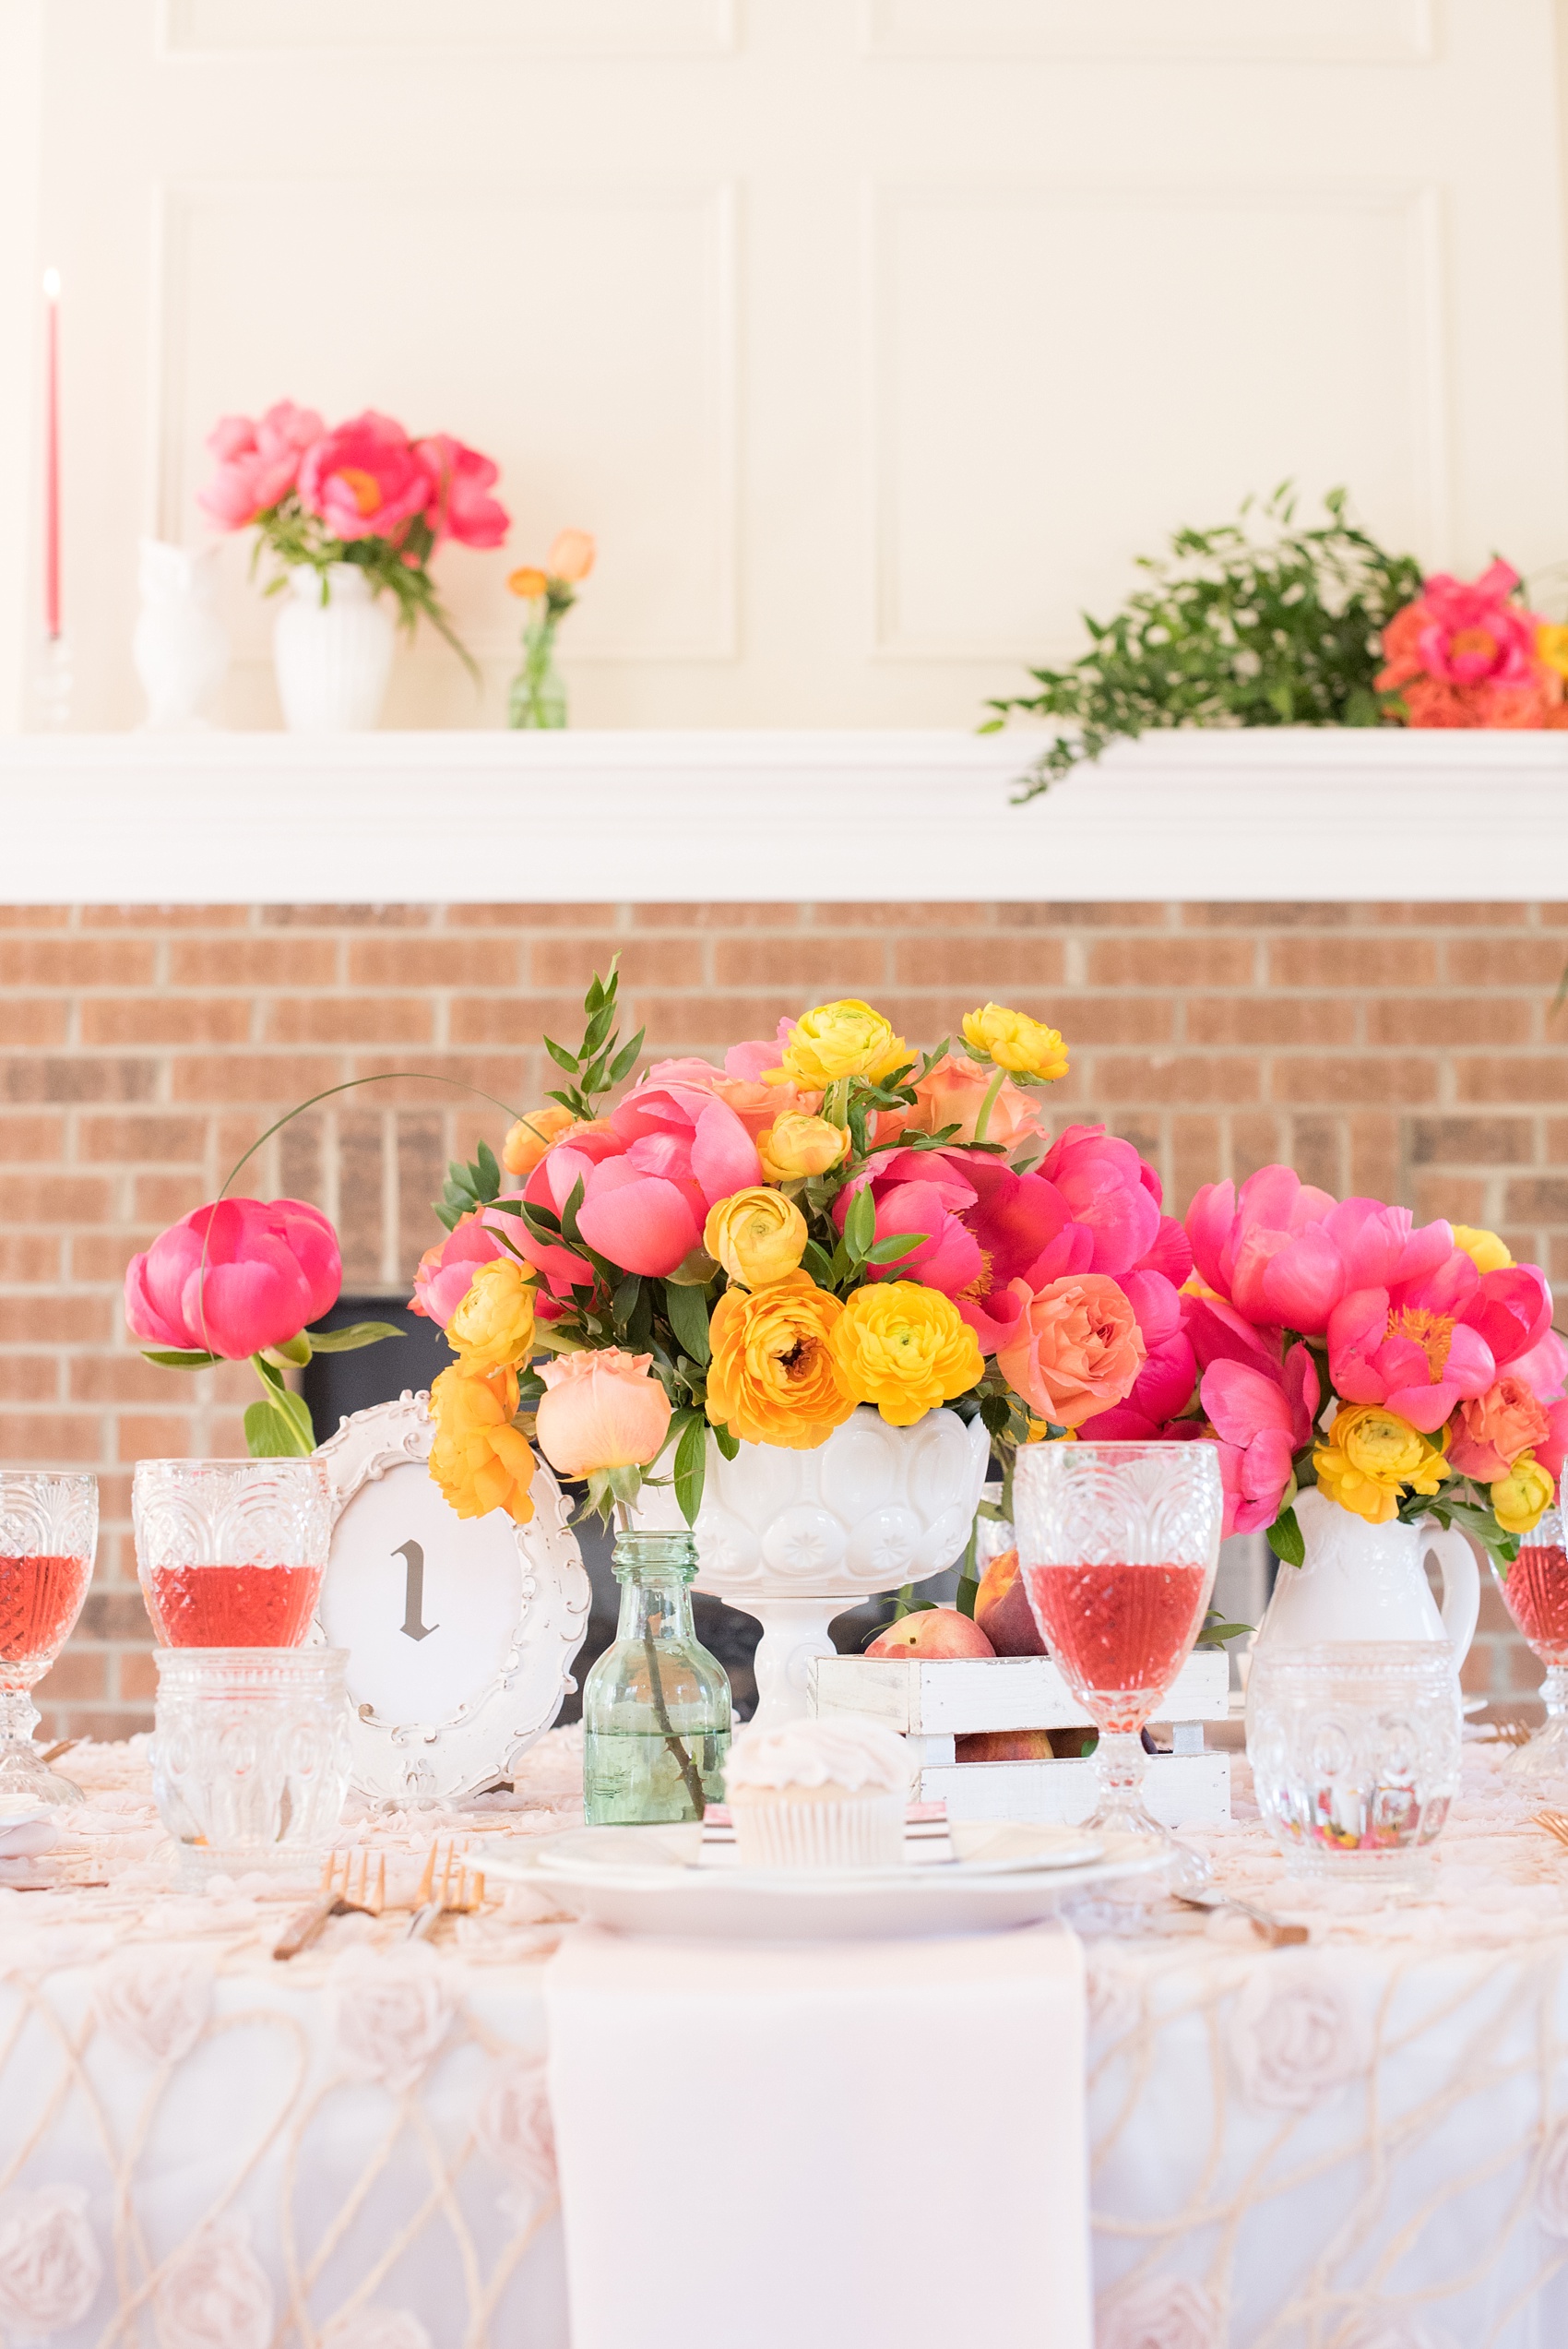 Mikkel Paige Photography wedding photo at The Bradford, NC. Modern pink, black and white table setup. Peonies and ranunculus and shabby chic peach holders.